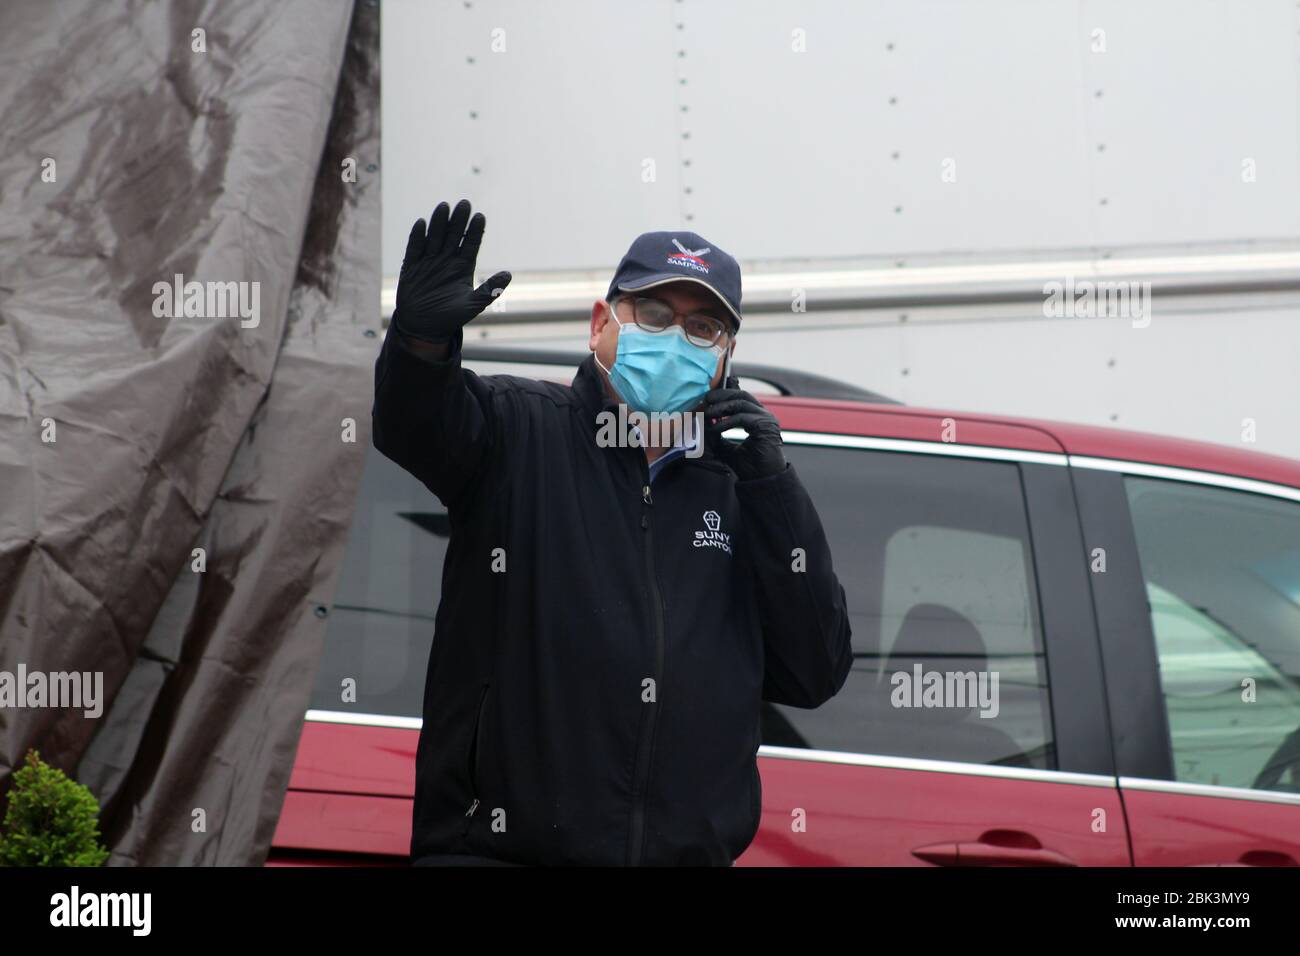 April 30, 2020, New York, New York, USA: This official representing New York City stands on the phone and hand up next to the Andrew T. Cleckley Funeral Home in Brooklyn where bodies non properly cared are removed. 60 corpses were stored in 4 non-refregerated rented trucks lining the street nearby stores. Neighbors reported a foul smell still persistent and fluids dripping from the trucks. Some remains were also found lying on the facilityÃ¢â‚¬â„¢s floor. The funeral home was overwhelmed by COVID-19 deaths. (Credit Image: © Marie Le Ble/ZUMA Wire) Stock Photo